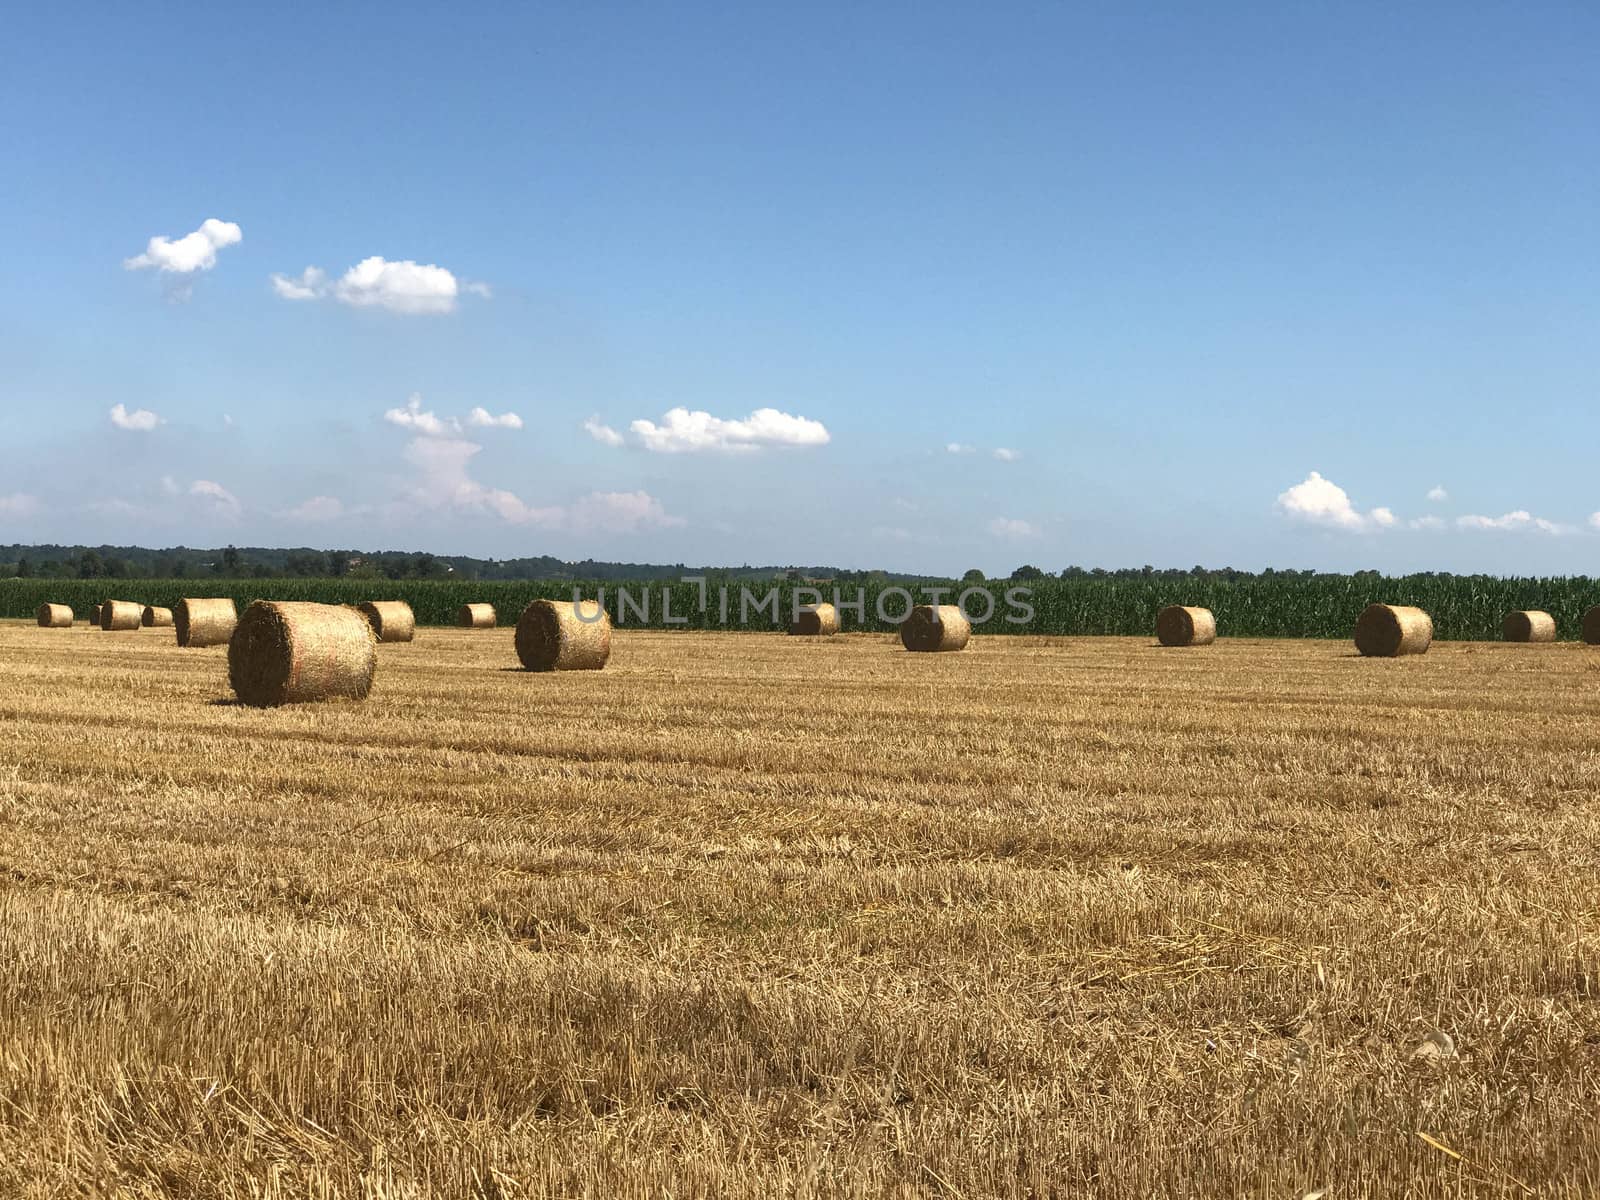 Hay bales in the countryside by cosca